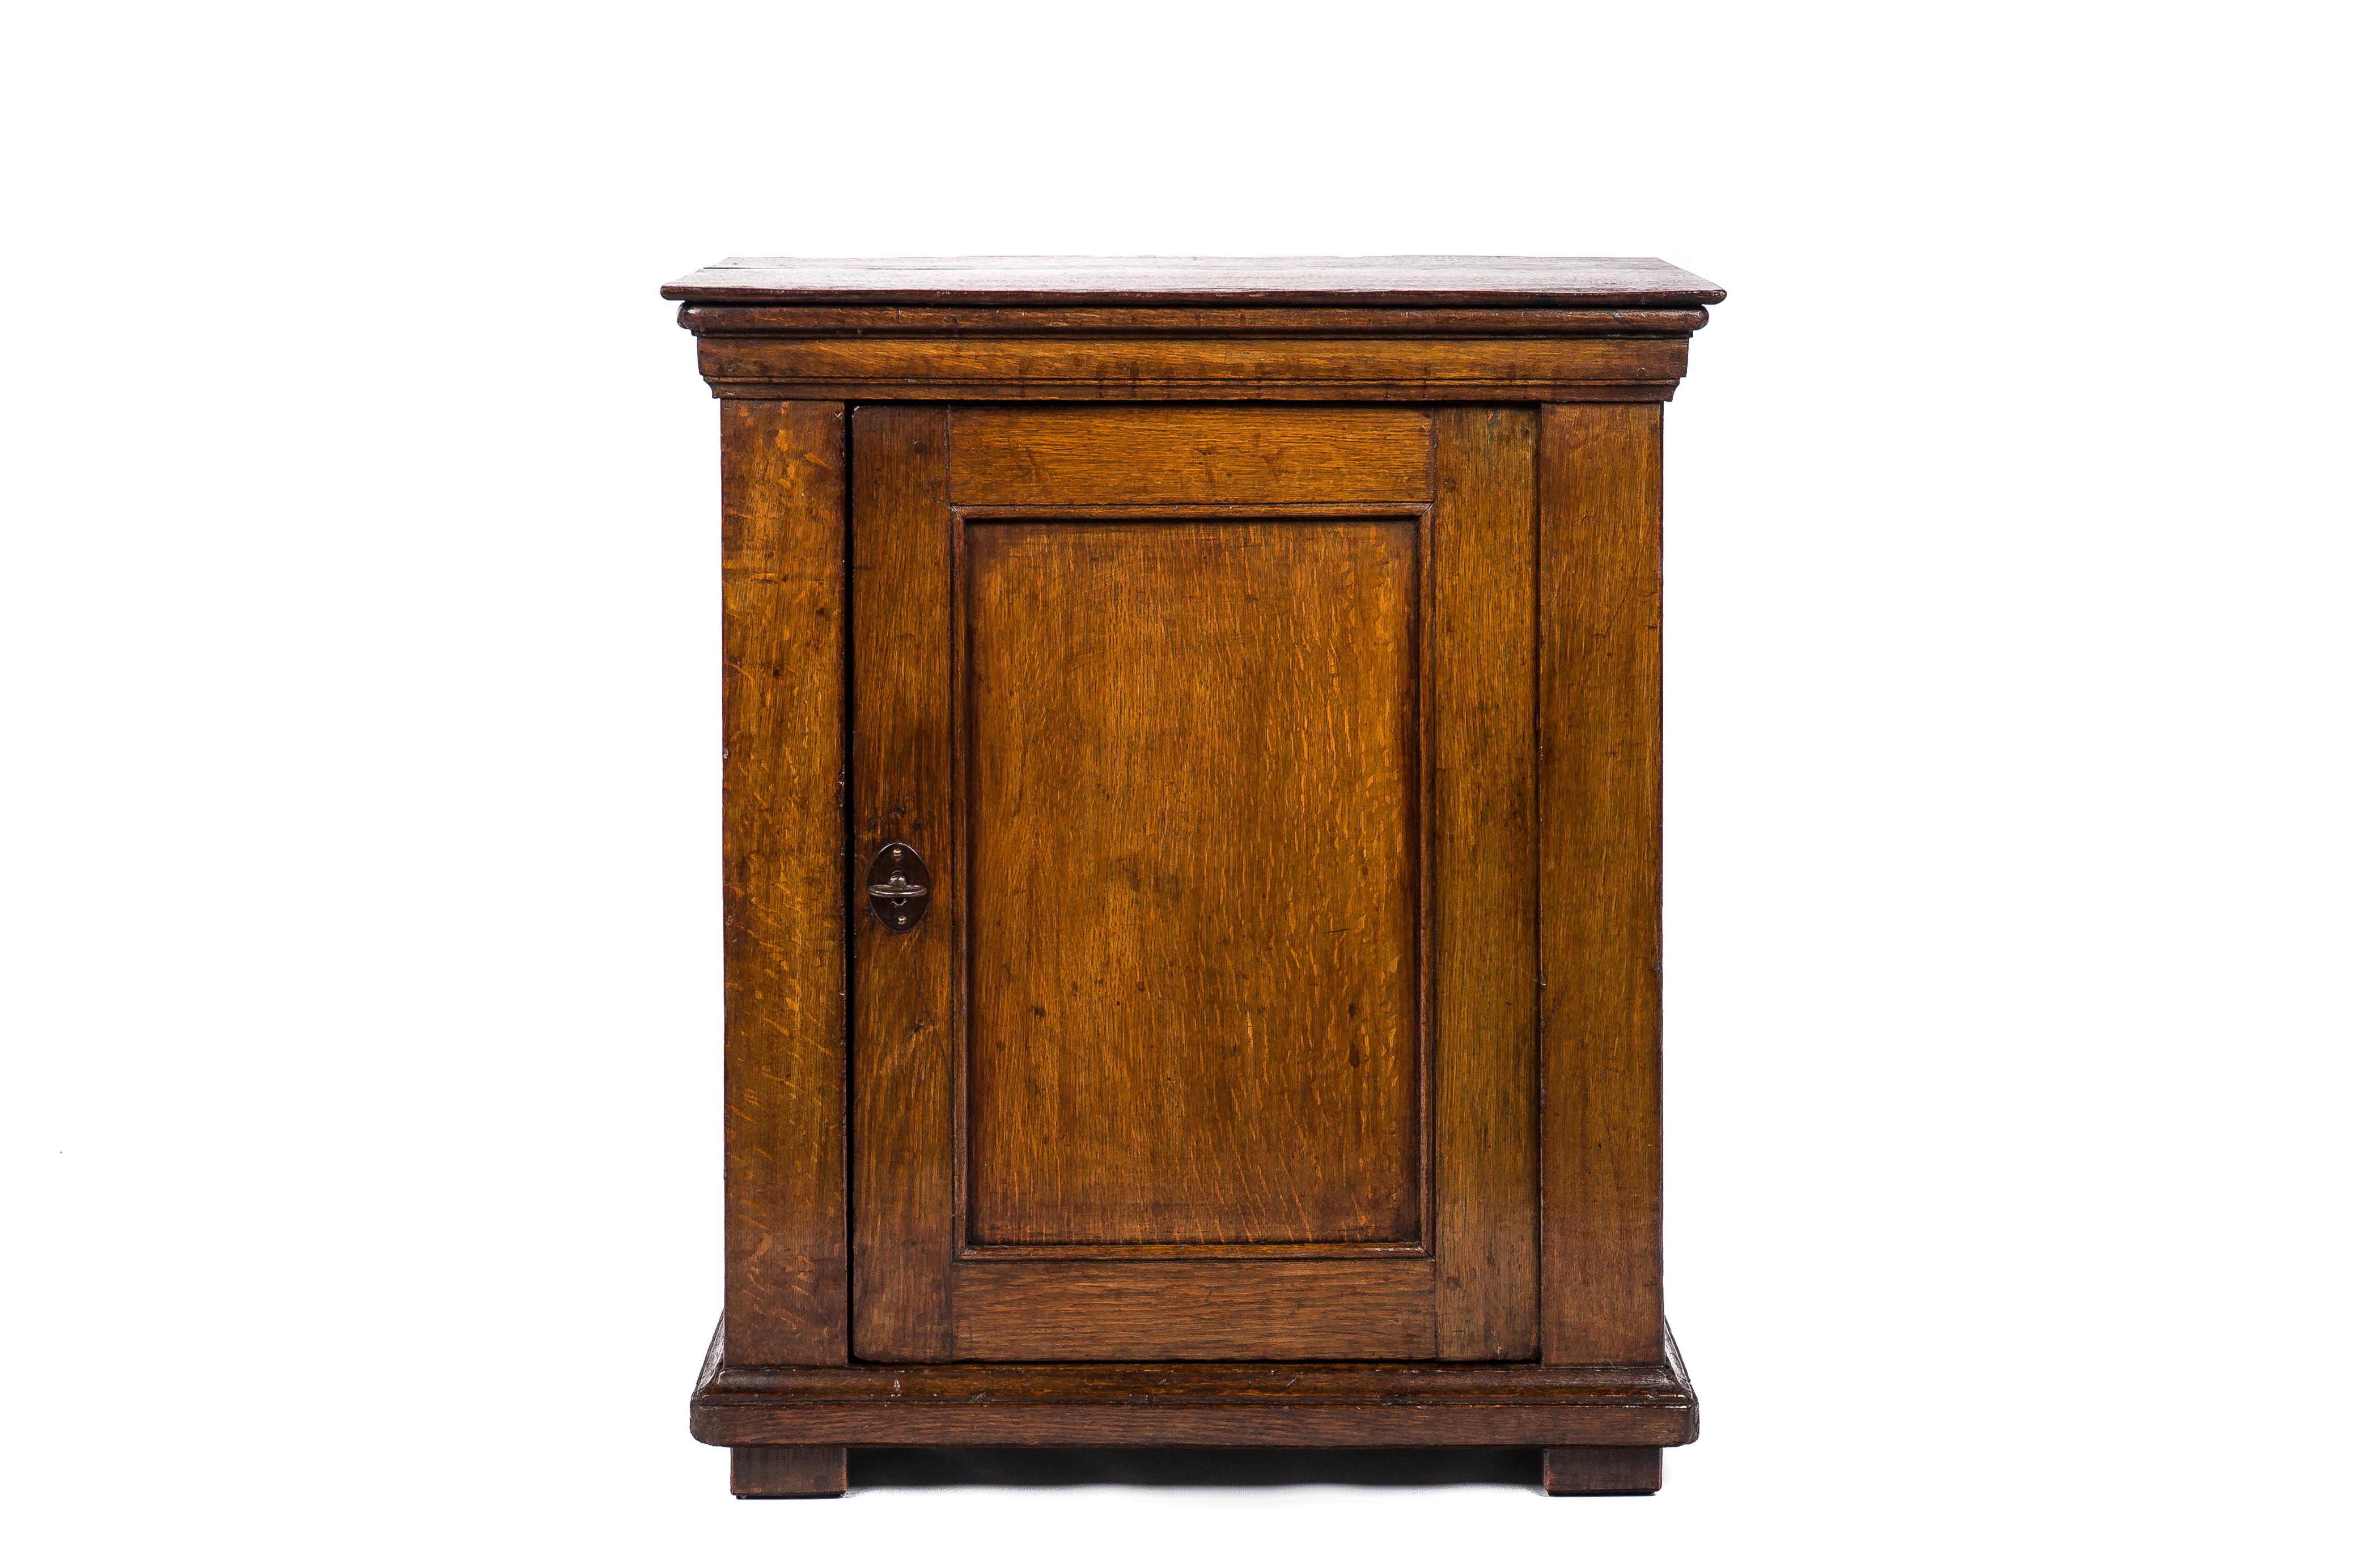 Introducing an exceptional antique Dutch cabinet that epitomizes 18th-century craftsmanship. Dating back to around 1750, this meticulously crafted piece exhibits a warm honey tone, deep gloss, and a distinguished patina, underscoring its historical